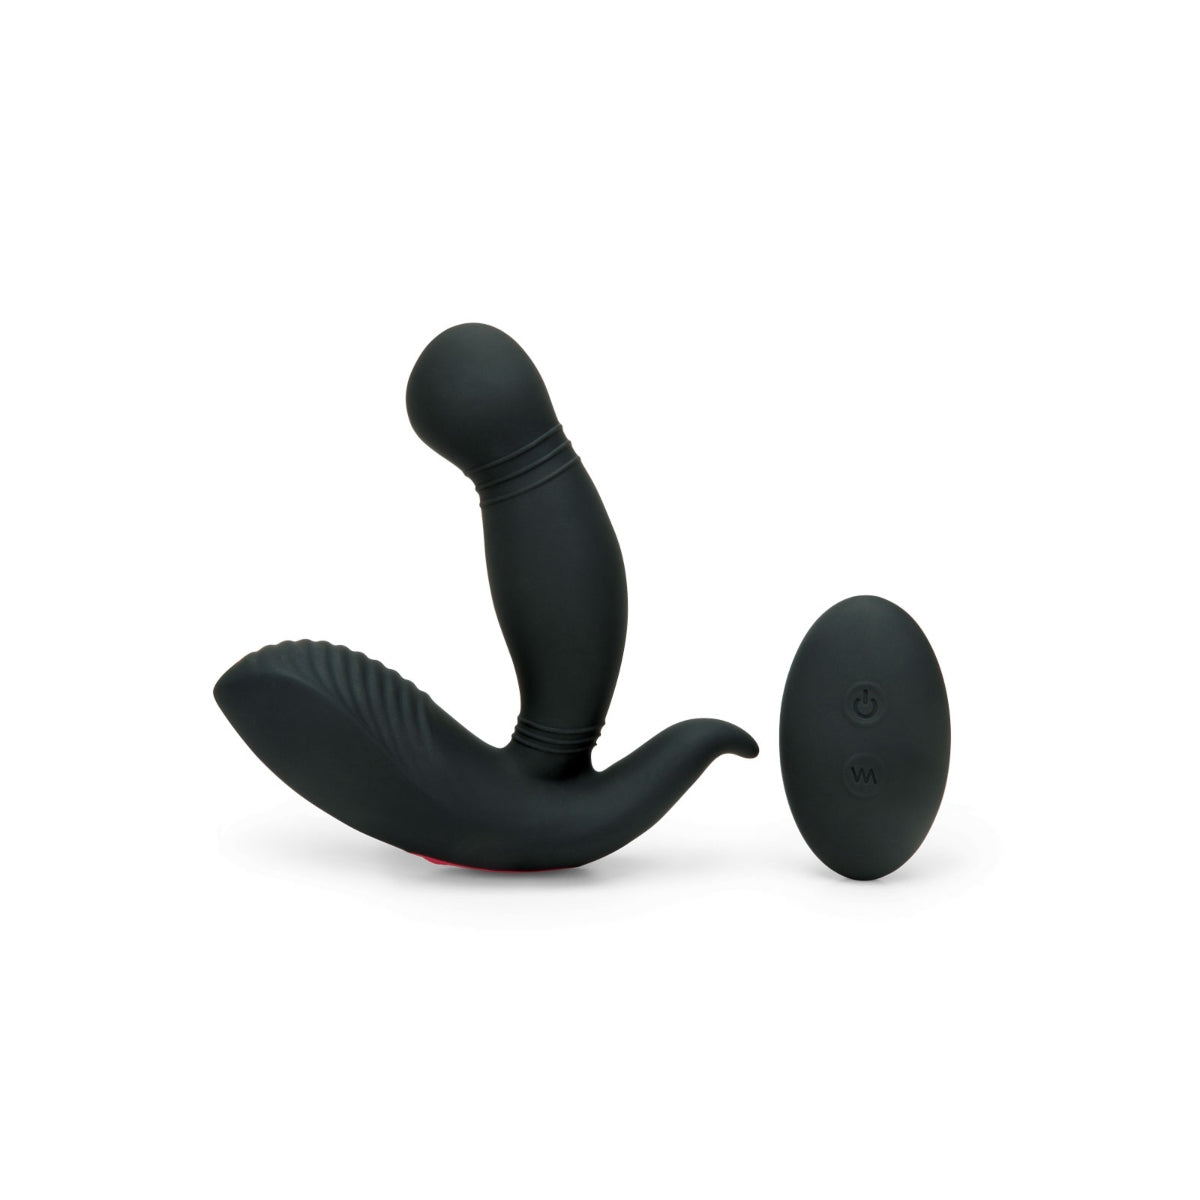 Prowler RED Remote Control Vibrating Prostate Massager Butt Plug (8246922739951)